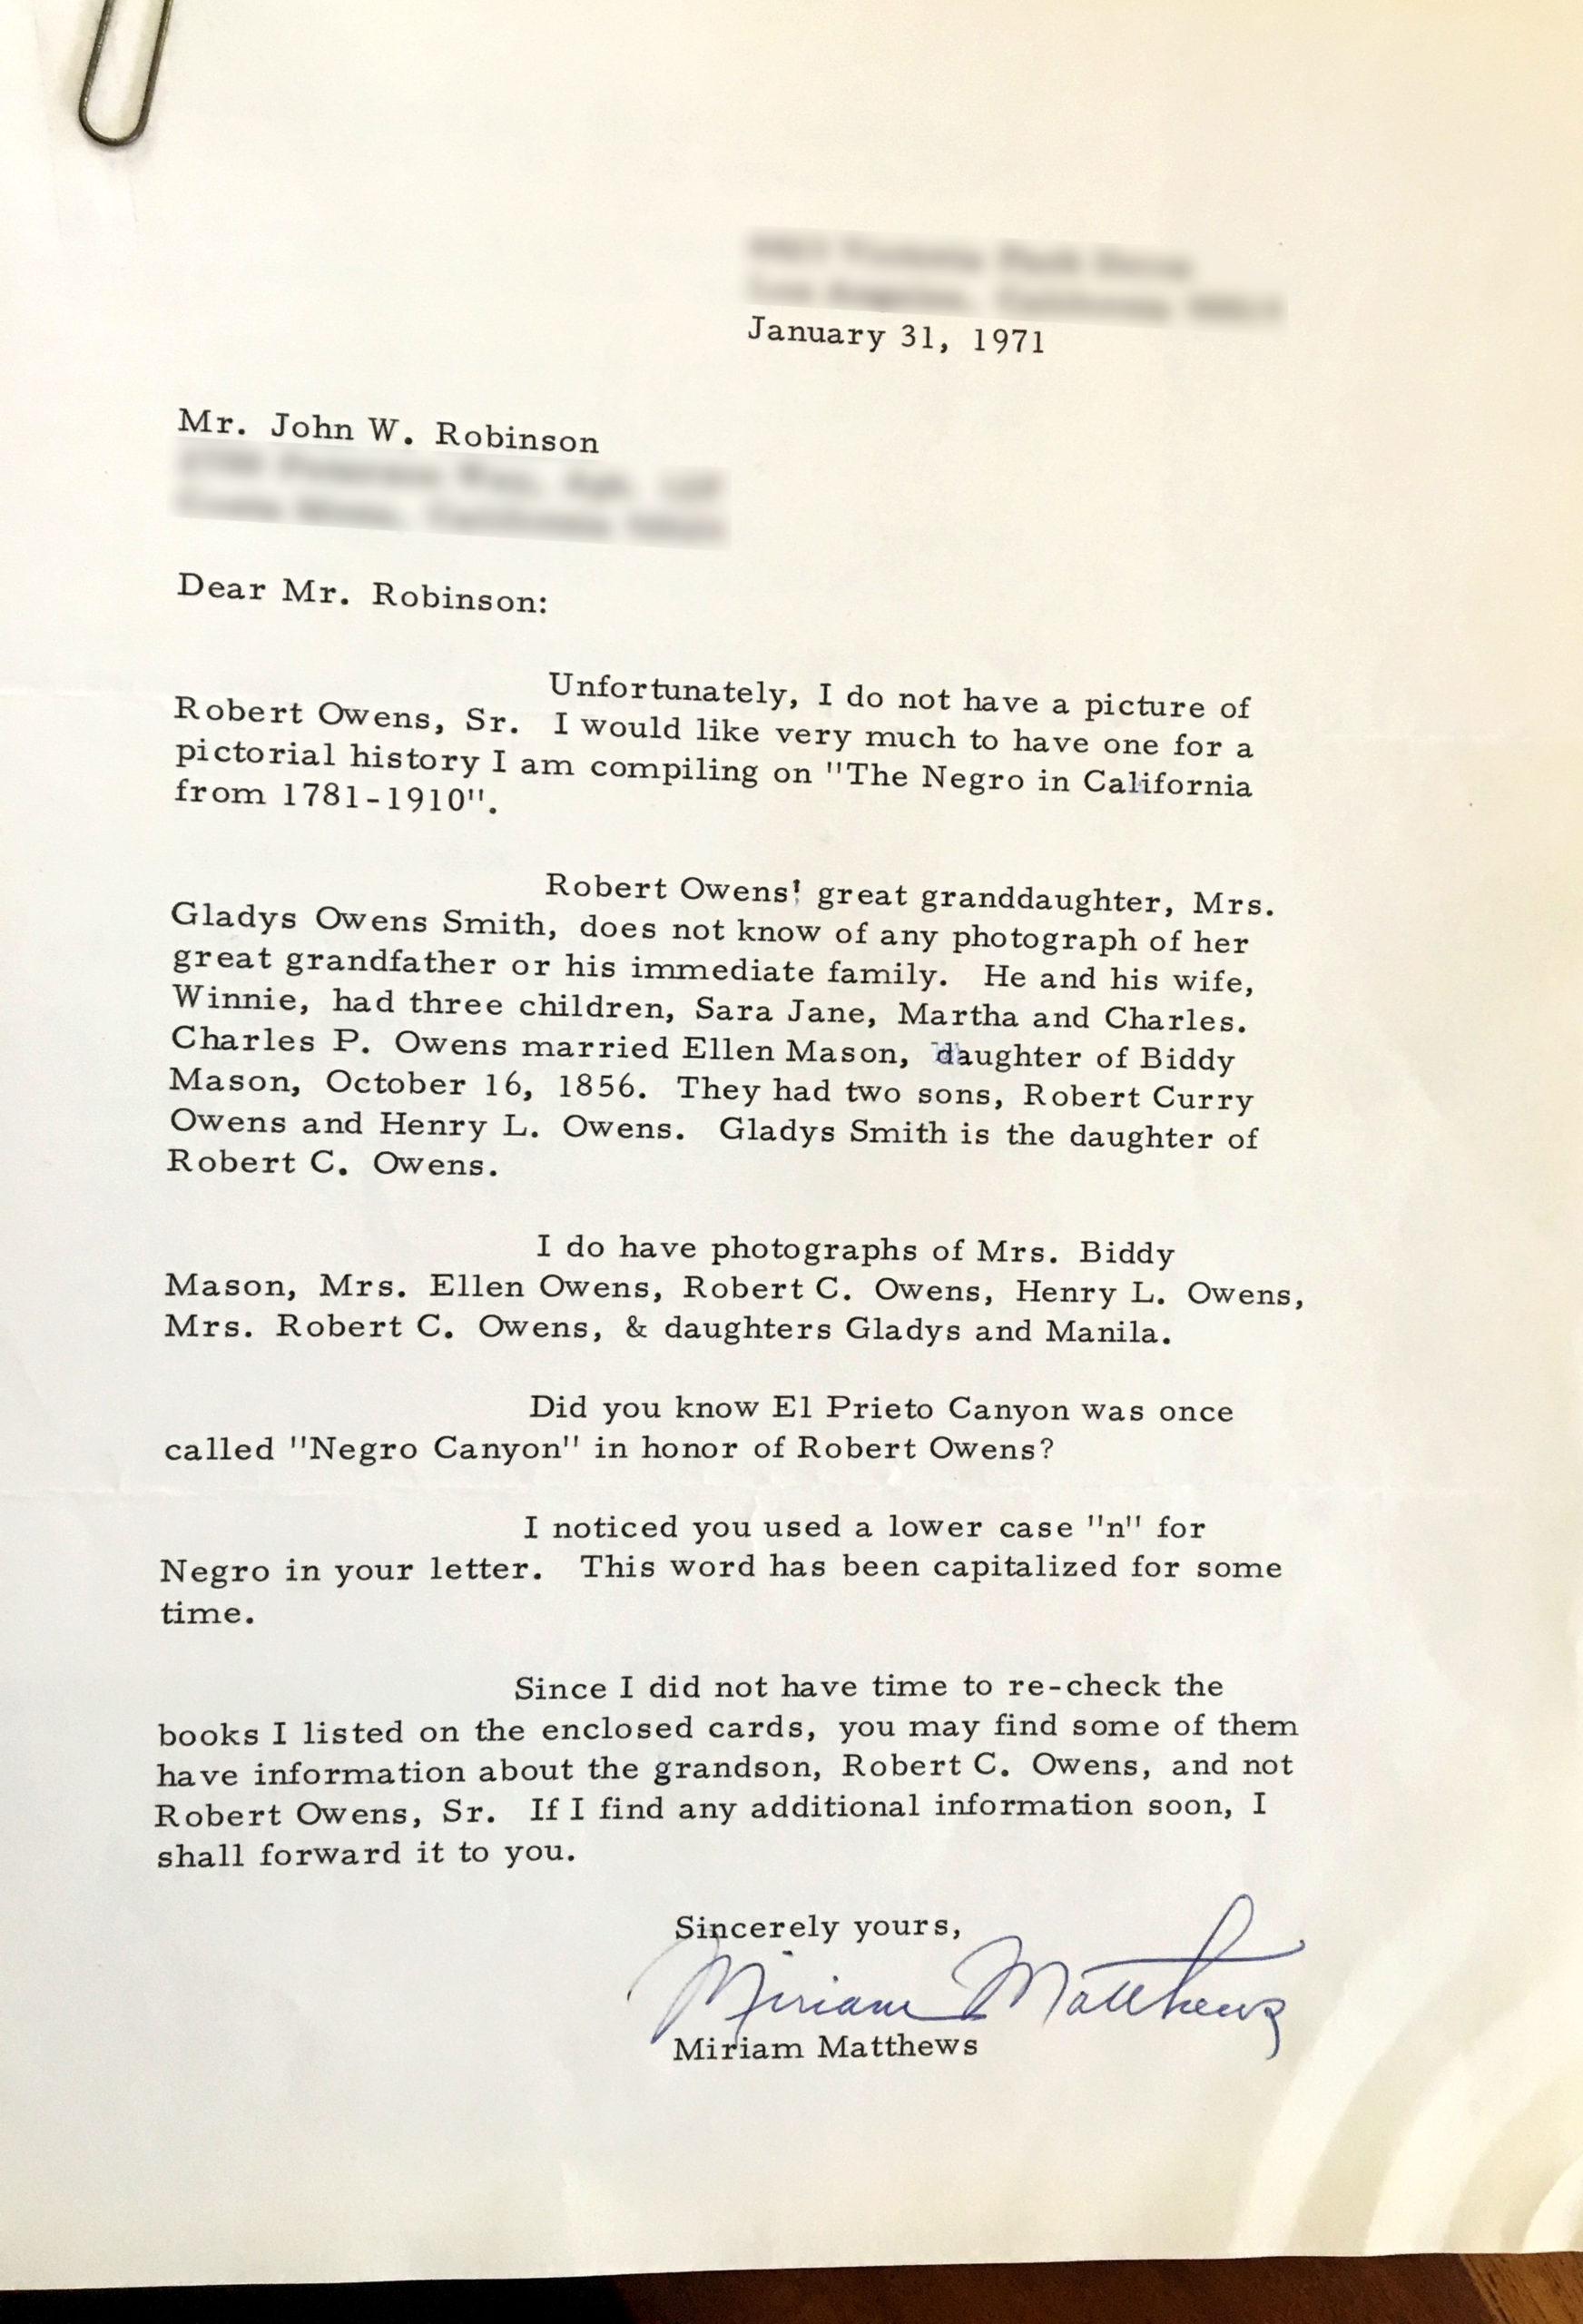 Mirriam's reply letter to John Robinson about photographs of the Robert Owens family